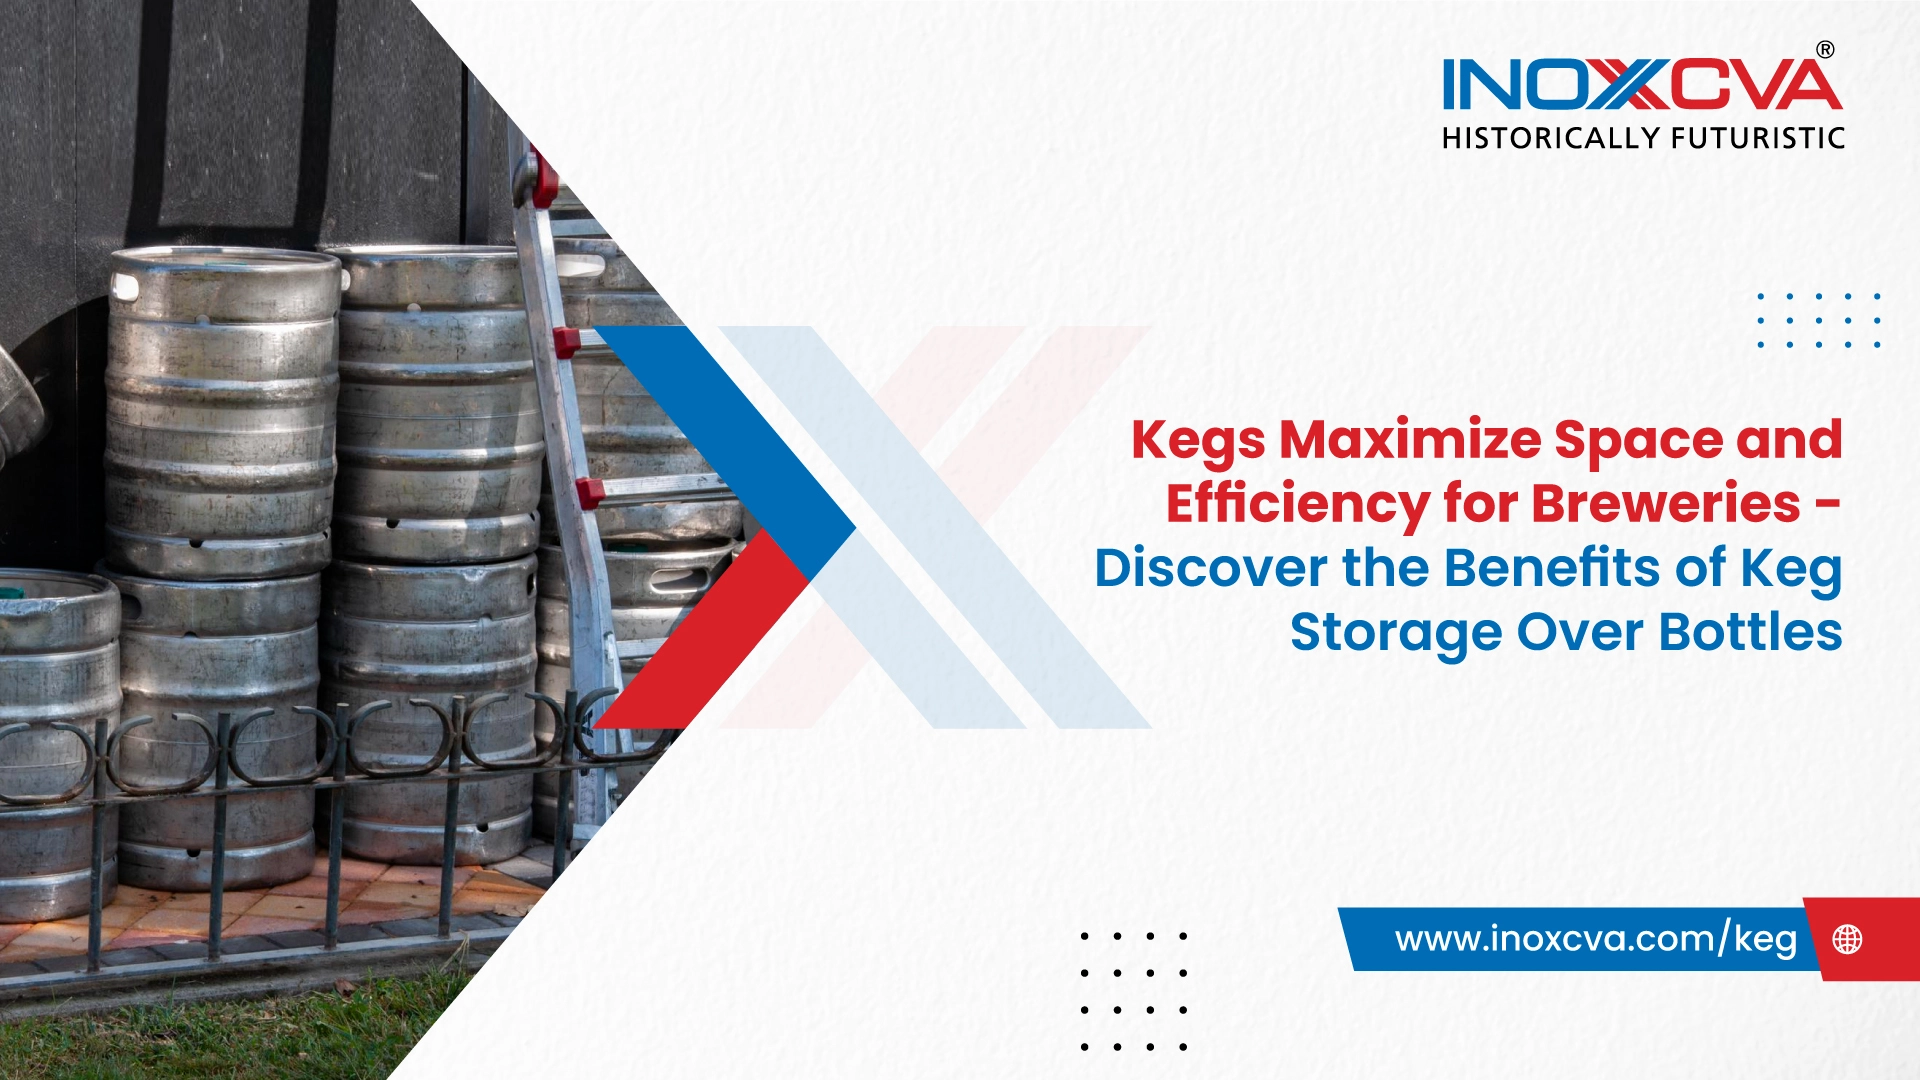 Kegs Maximize Space and Efficiency for Breweries - Discover the Benefits of Keg Storage Over Bottles